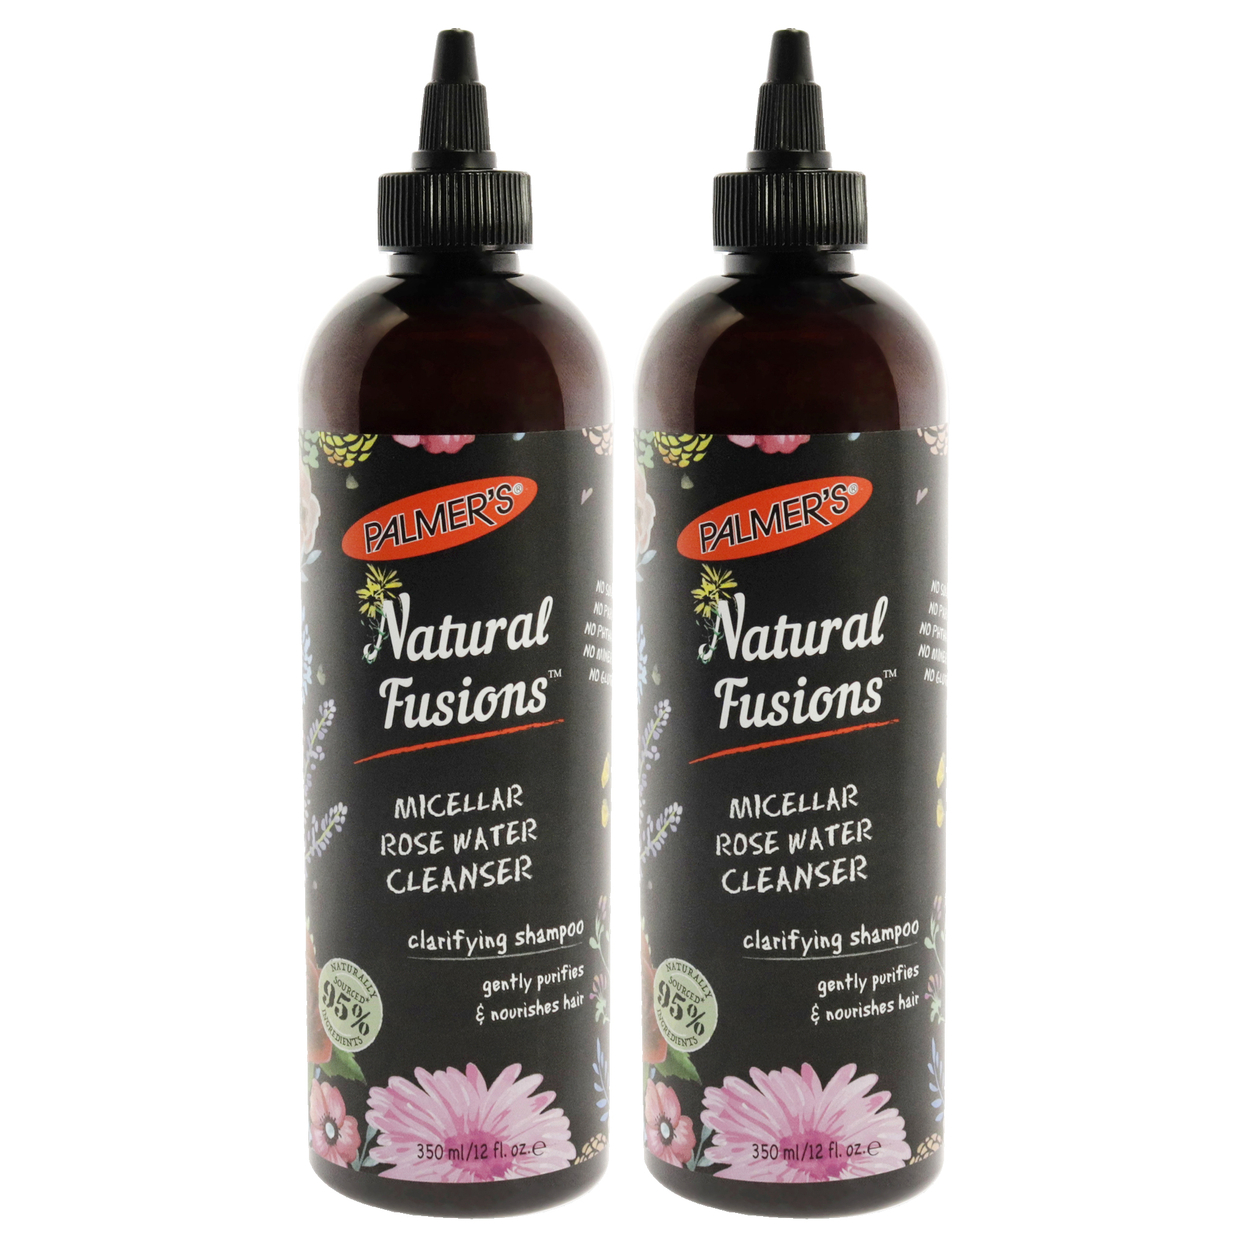 Palmers Natural Fusions Micellar Rose Water Cleanser Clarifying Shampoo - Pack Of 2 Shampoo 12 Oz